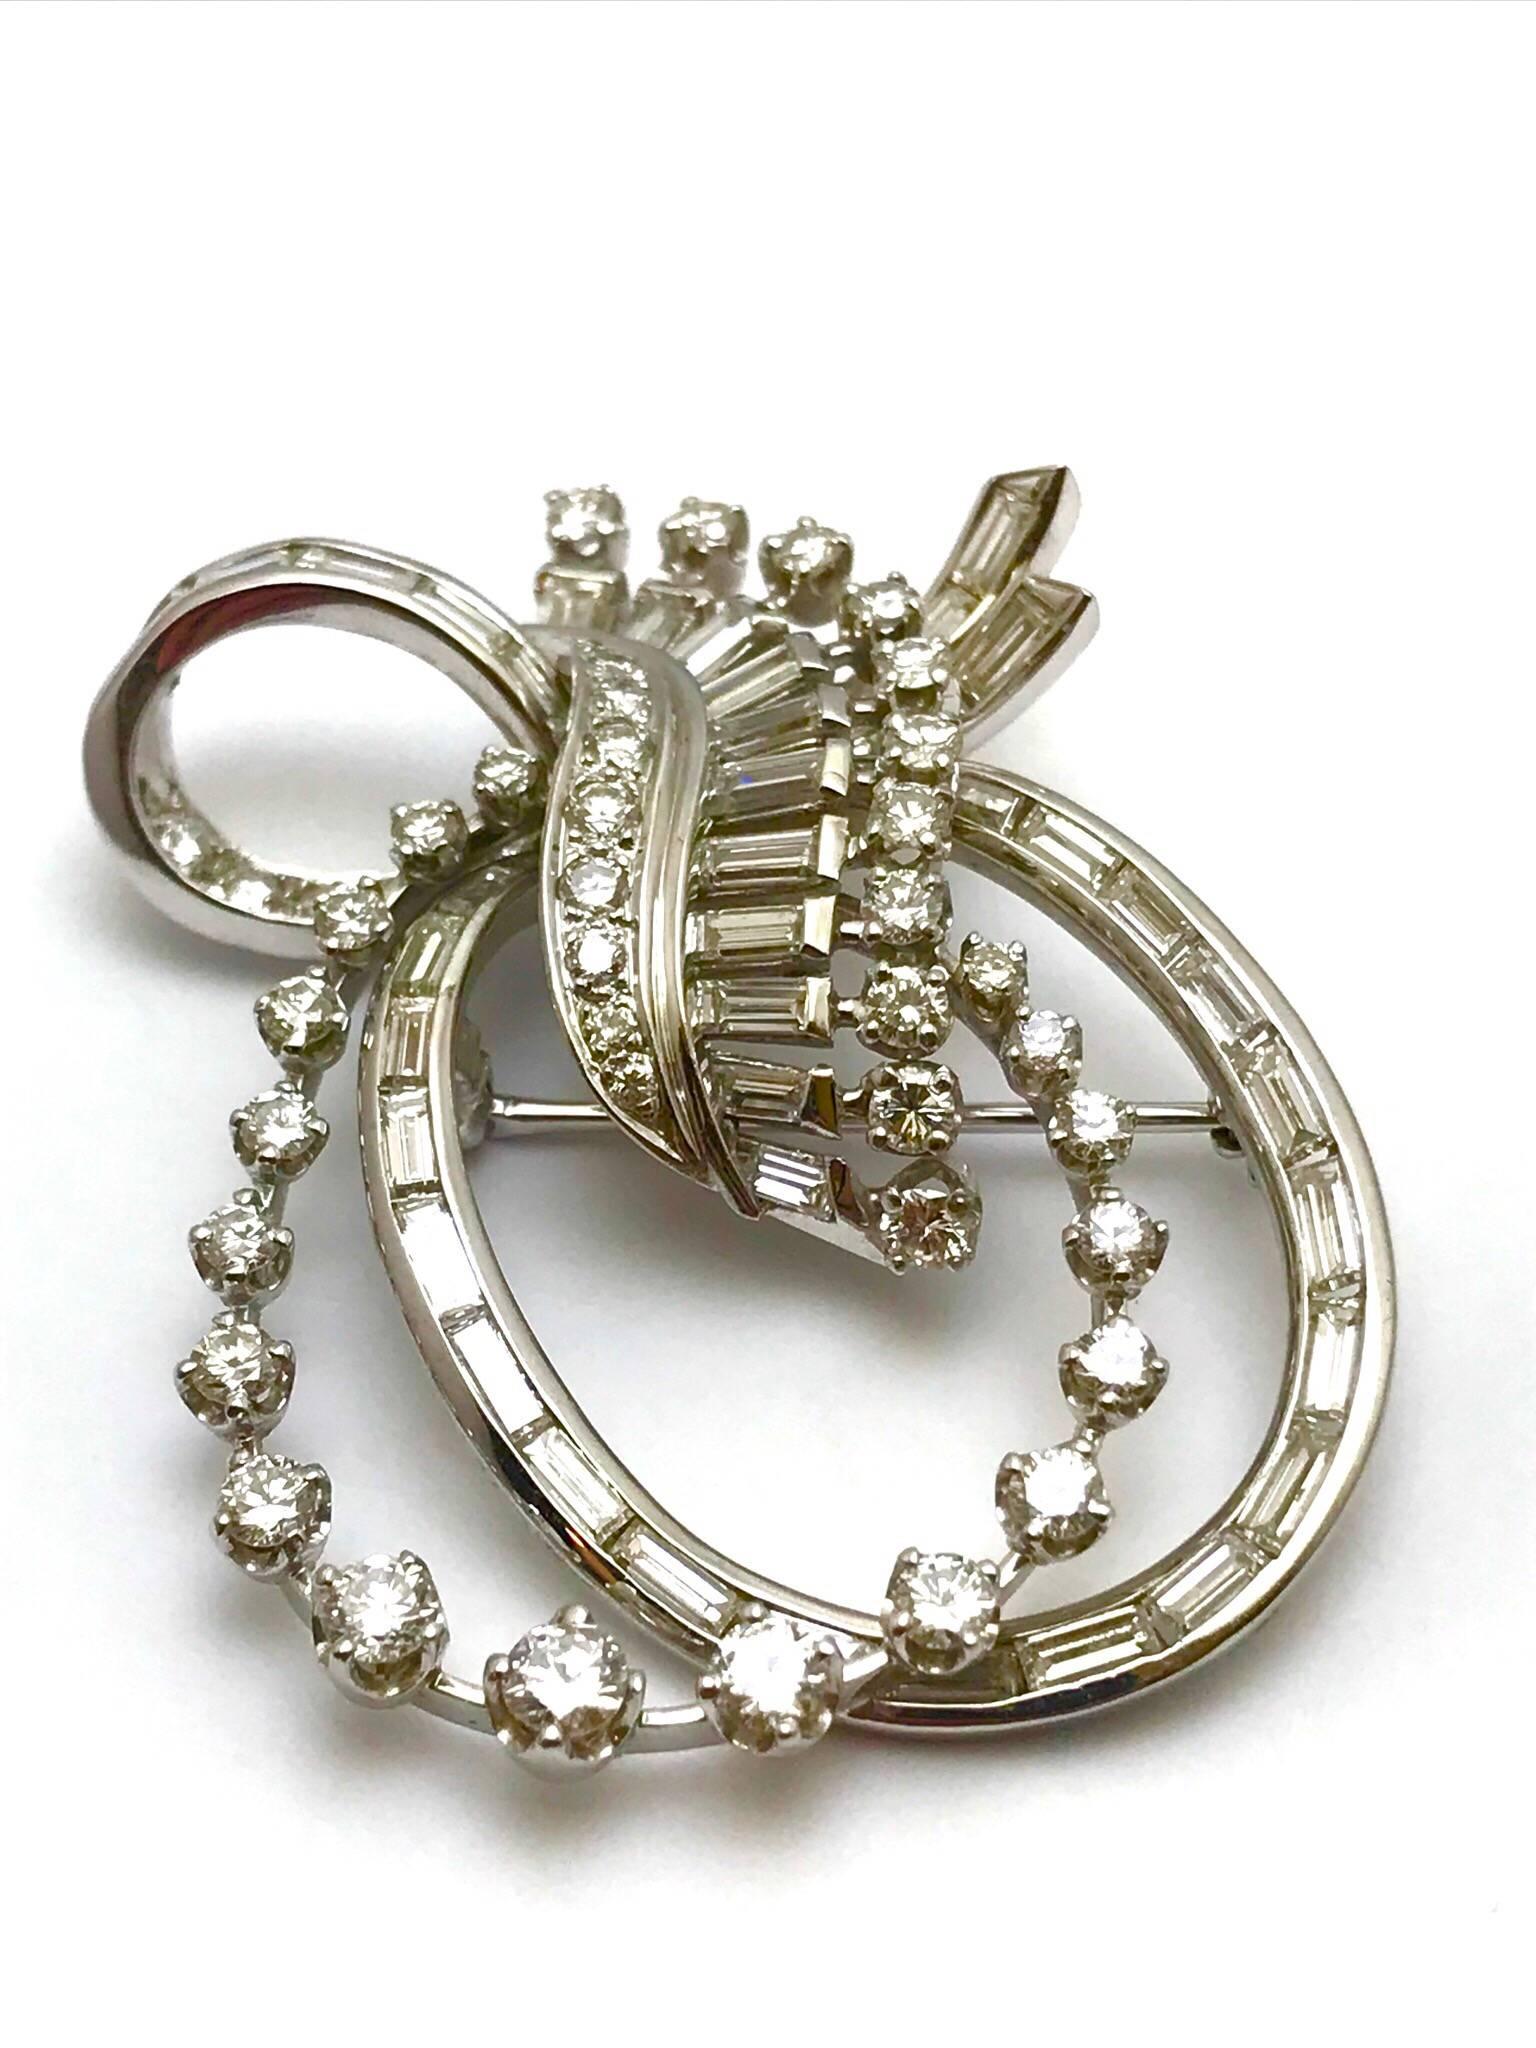 A round brilliant and baguette diamond platinum double bow pendant and brooch.  The baguette cut diamonds are channel set, with prong set round brilliant diamonds.  There is a total of 87 diamonds with a total weight of 5.26 carats.  The diamonds